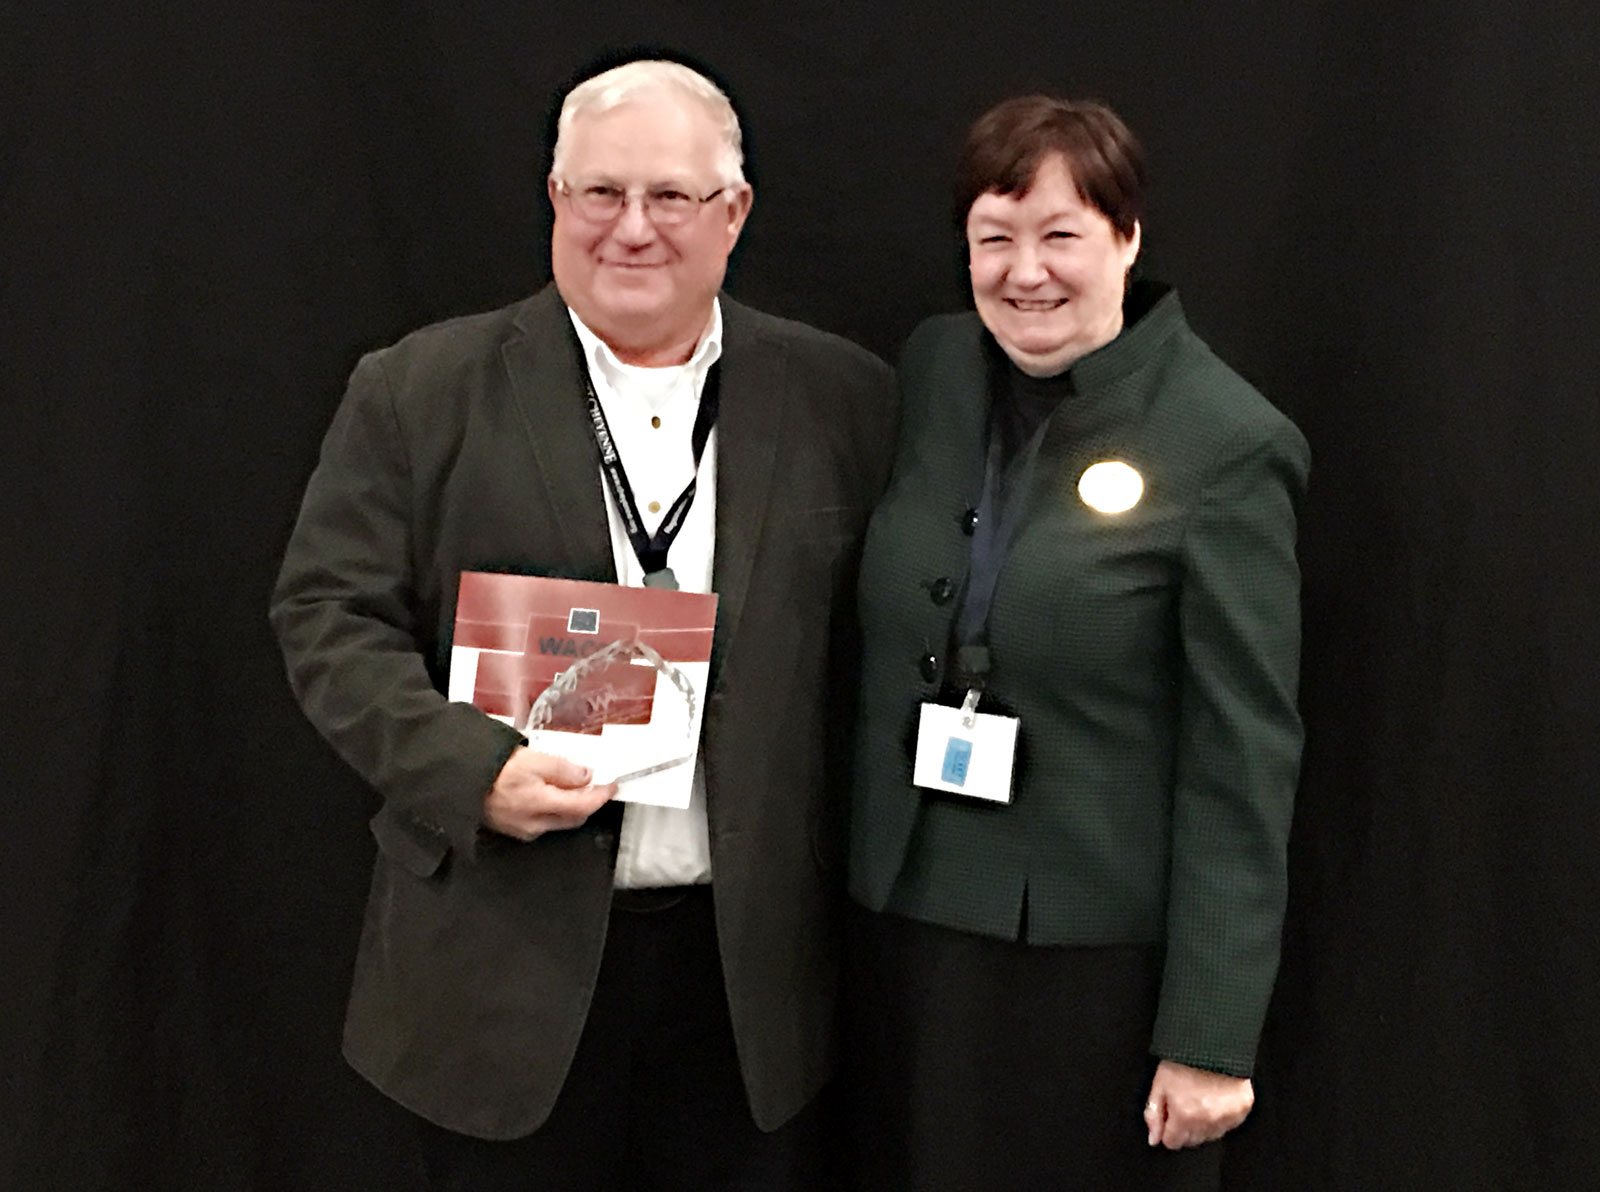 WACCT Professional Employee of the Year Stan Nicolls with EWC President Dr. Lesley Travers.